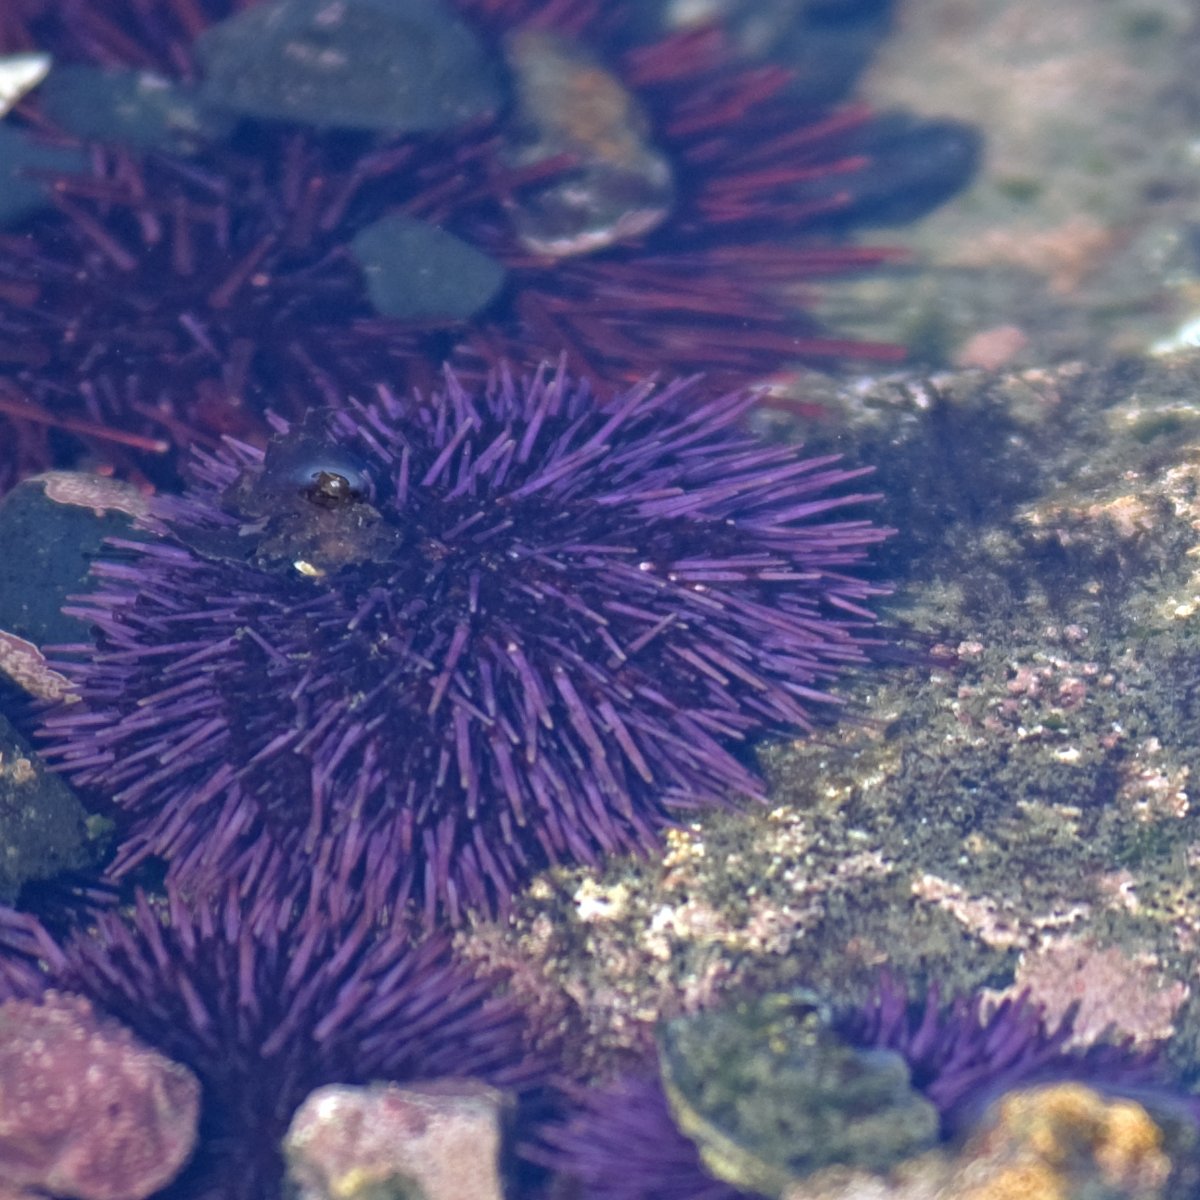 Sea urchins are spheres, up to fist-sized, of richly purple spines.  The spines are long enough to take up perhaps a quarter of the overall height and width of the urchin—about ½ to 1½ inches long, depending on the size of the urchin.  Sometimes the urchin spines are tidy, arranged in neat rows radiating from the center top and down the sides to the bottom, other times the spines have pivoted about irregularly, giving the urchin a disheveled look.  The softer tissues beneath and between the spines is very dark purple—nearly black.  Some urchins have rocks or pieces of shells attached.  Most purple urchins on the Oregon Coast live in shallow, urchin-shaped pits. style=